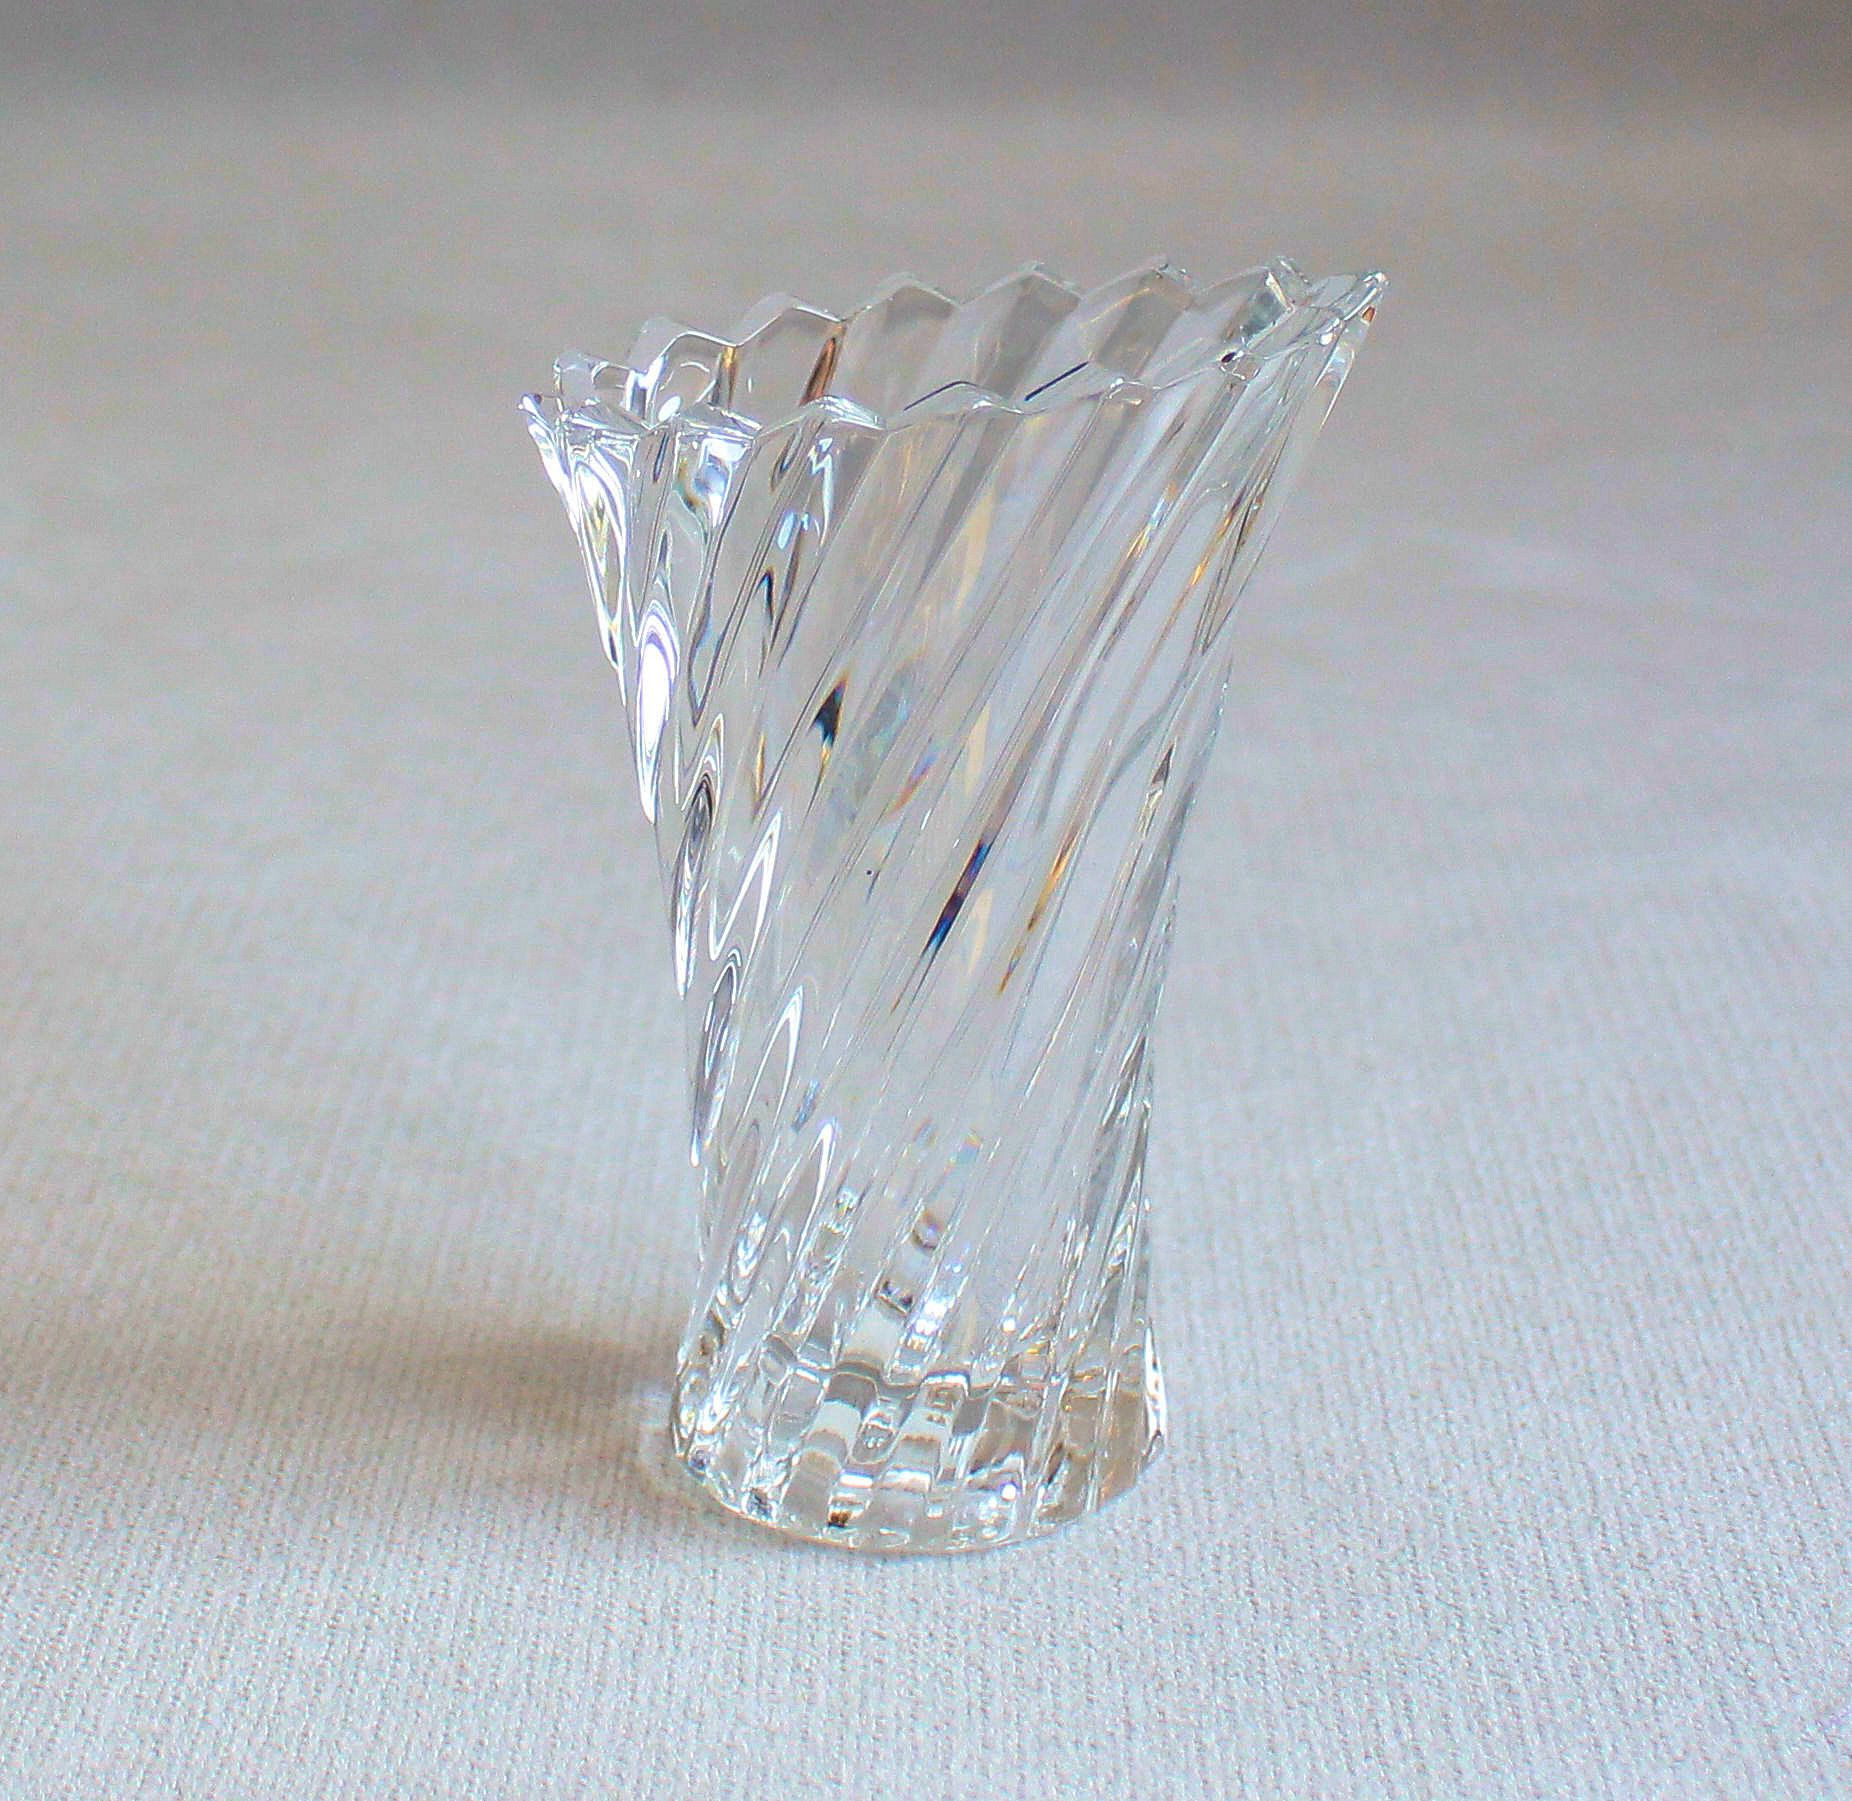 23 Best Small Clear Vases 2024 free download small clear vases of 5 vintage purple vasevintage glass vase vessel gold trim for 5 vintage purple vasevintage glass vase vessel gold trim souvenir